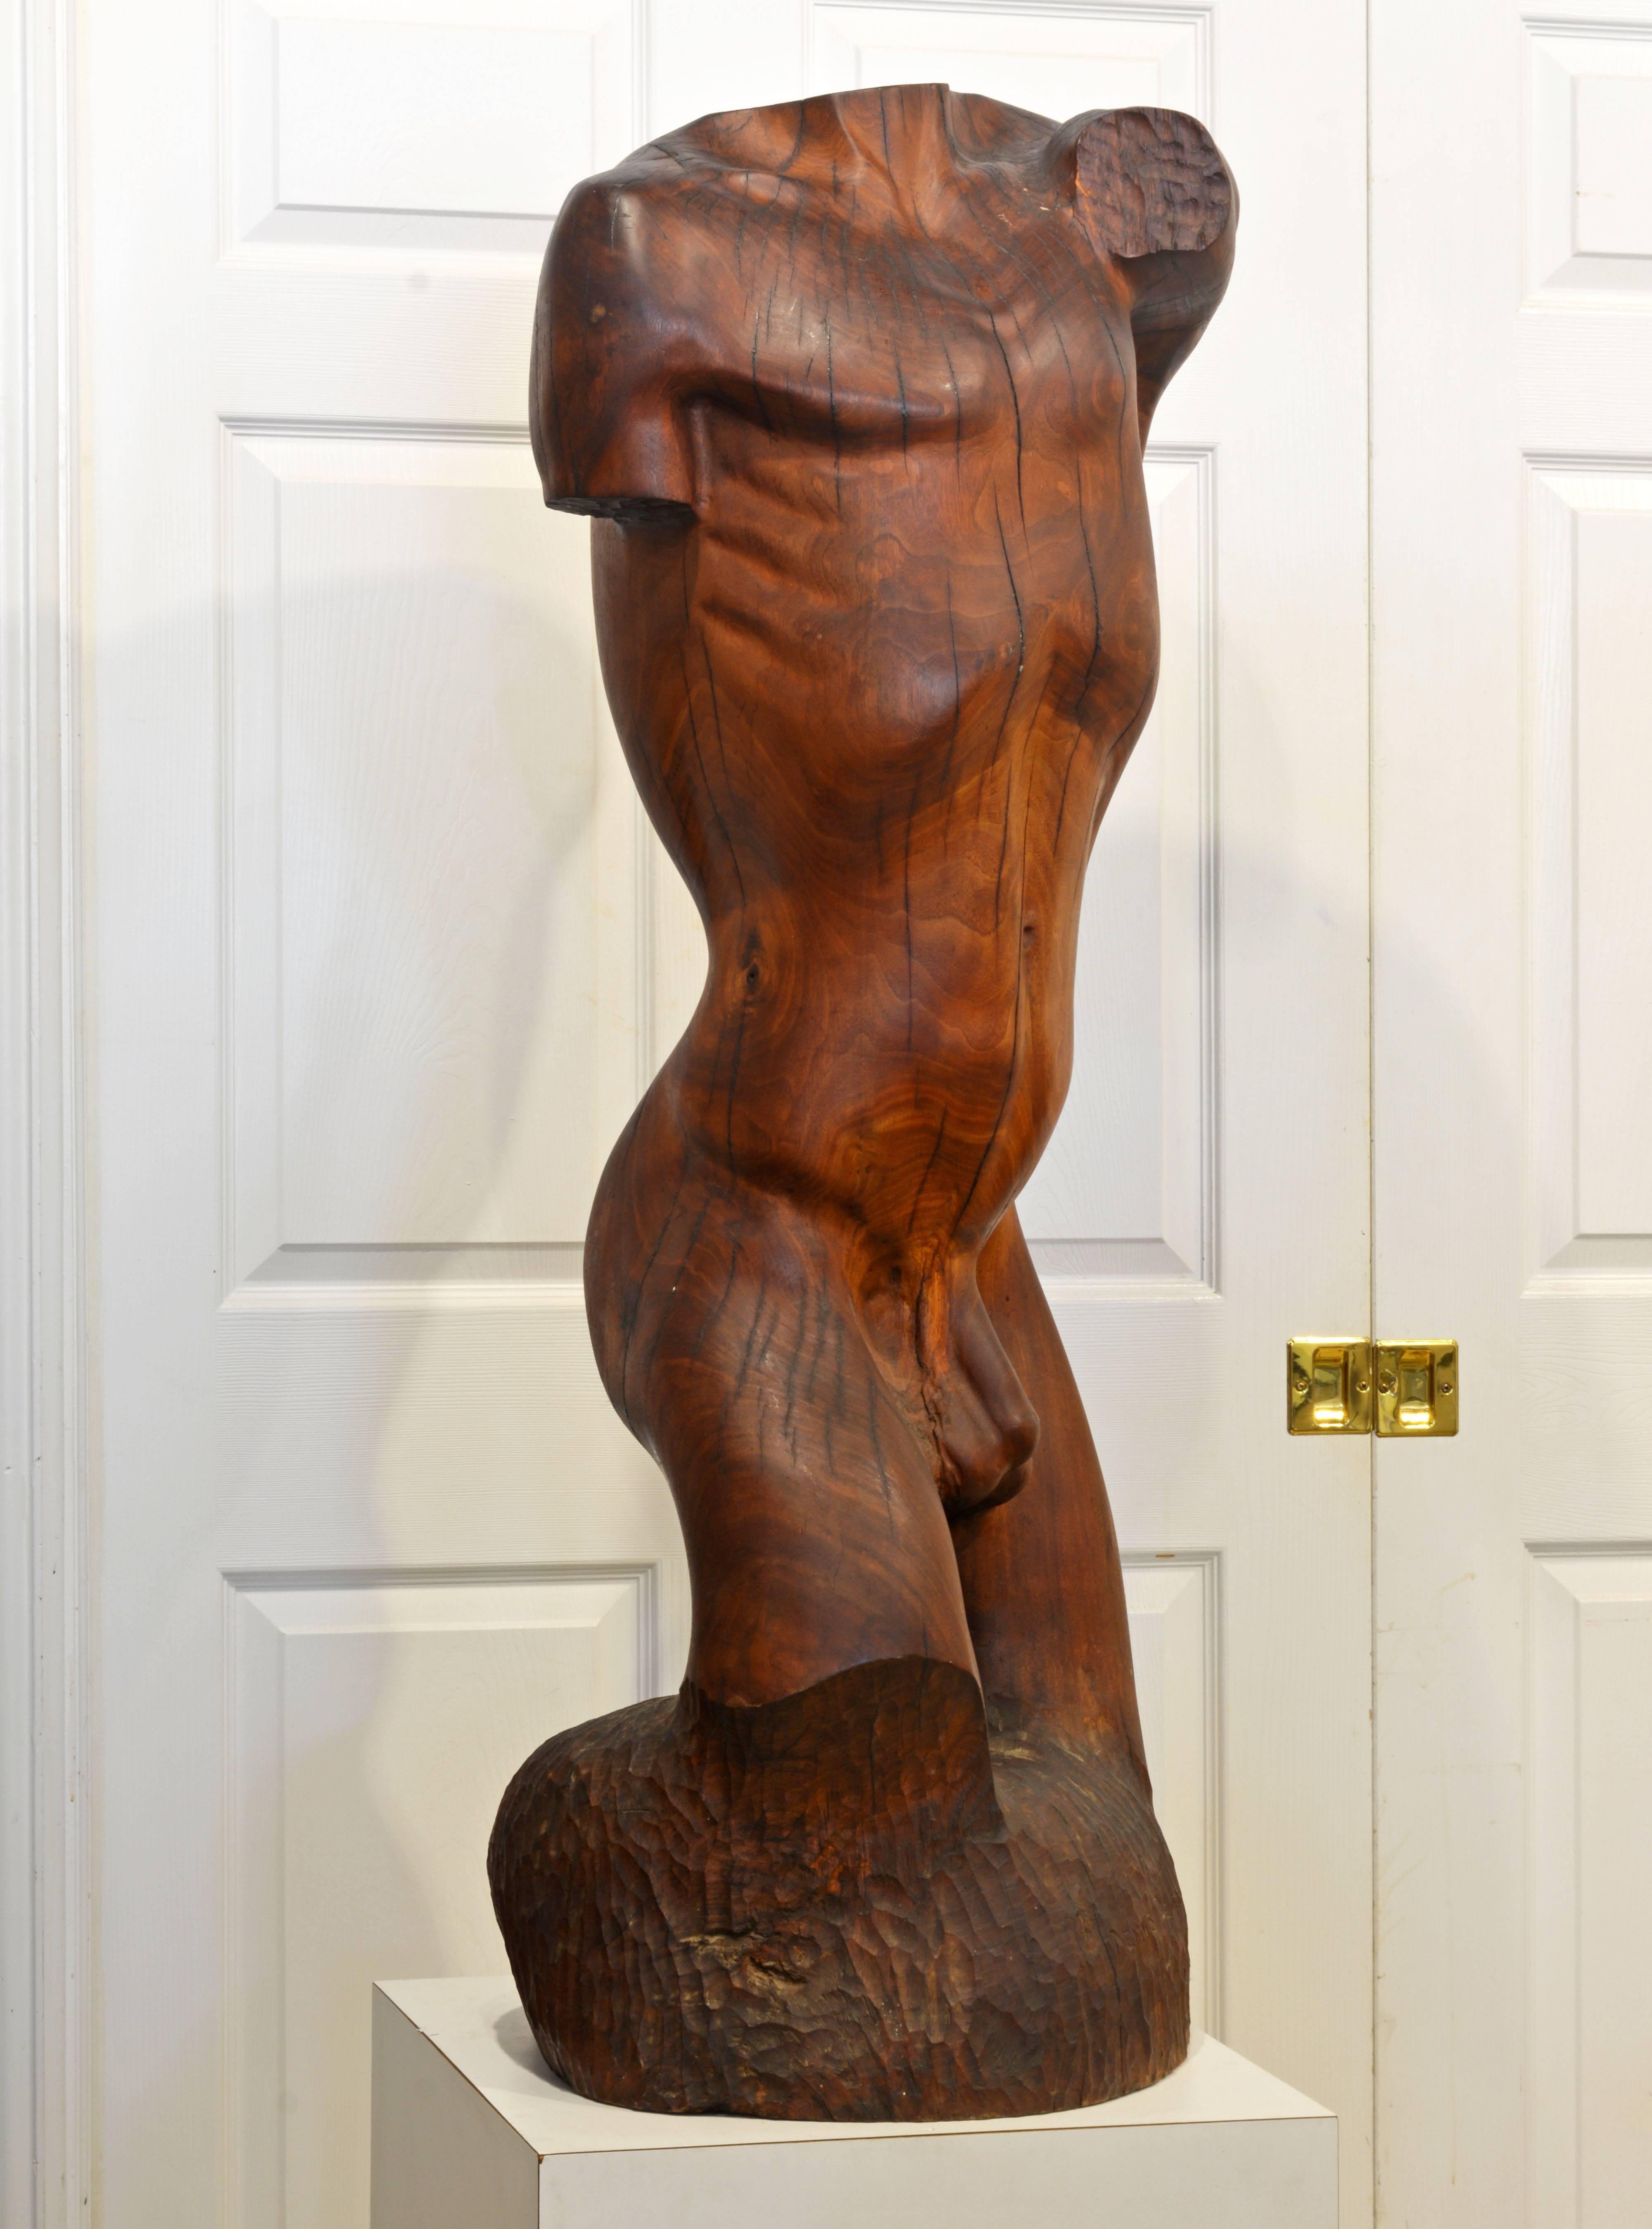 Standing 47 inches tall this statue is carved out of a hardwood tree trunk and combines naturally organic lines with the artist strong intentions. The statue offers new surprising perspectives from all sides complimented by the warm wood tones and